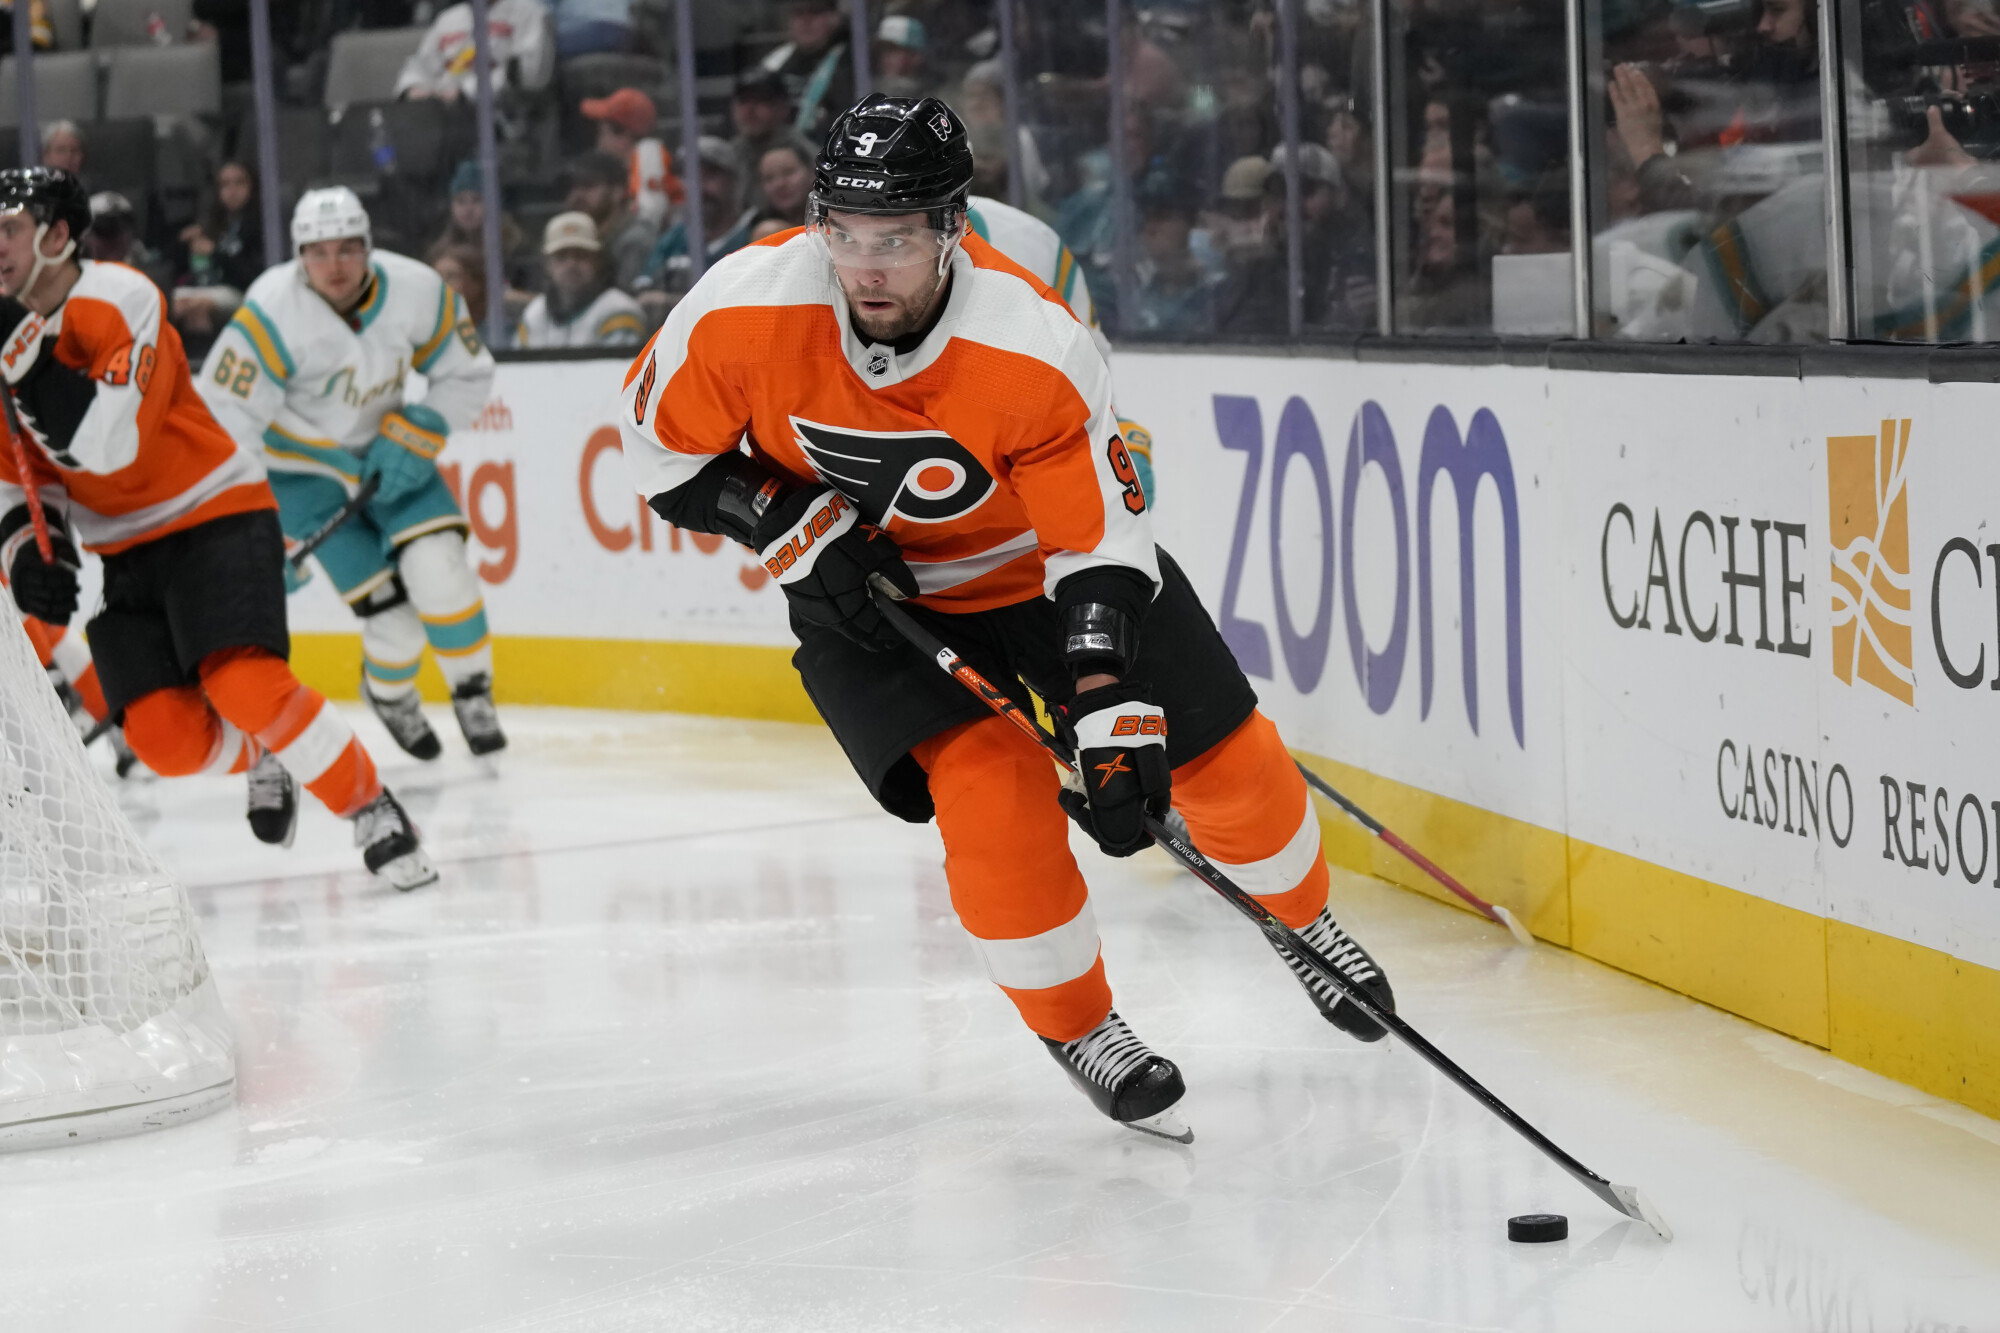 Ivan Provorov's jersey now sold out after Tuesday night's protest